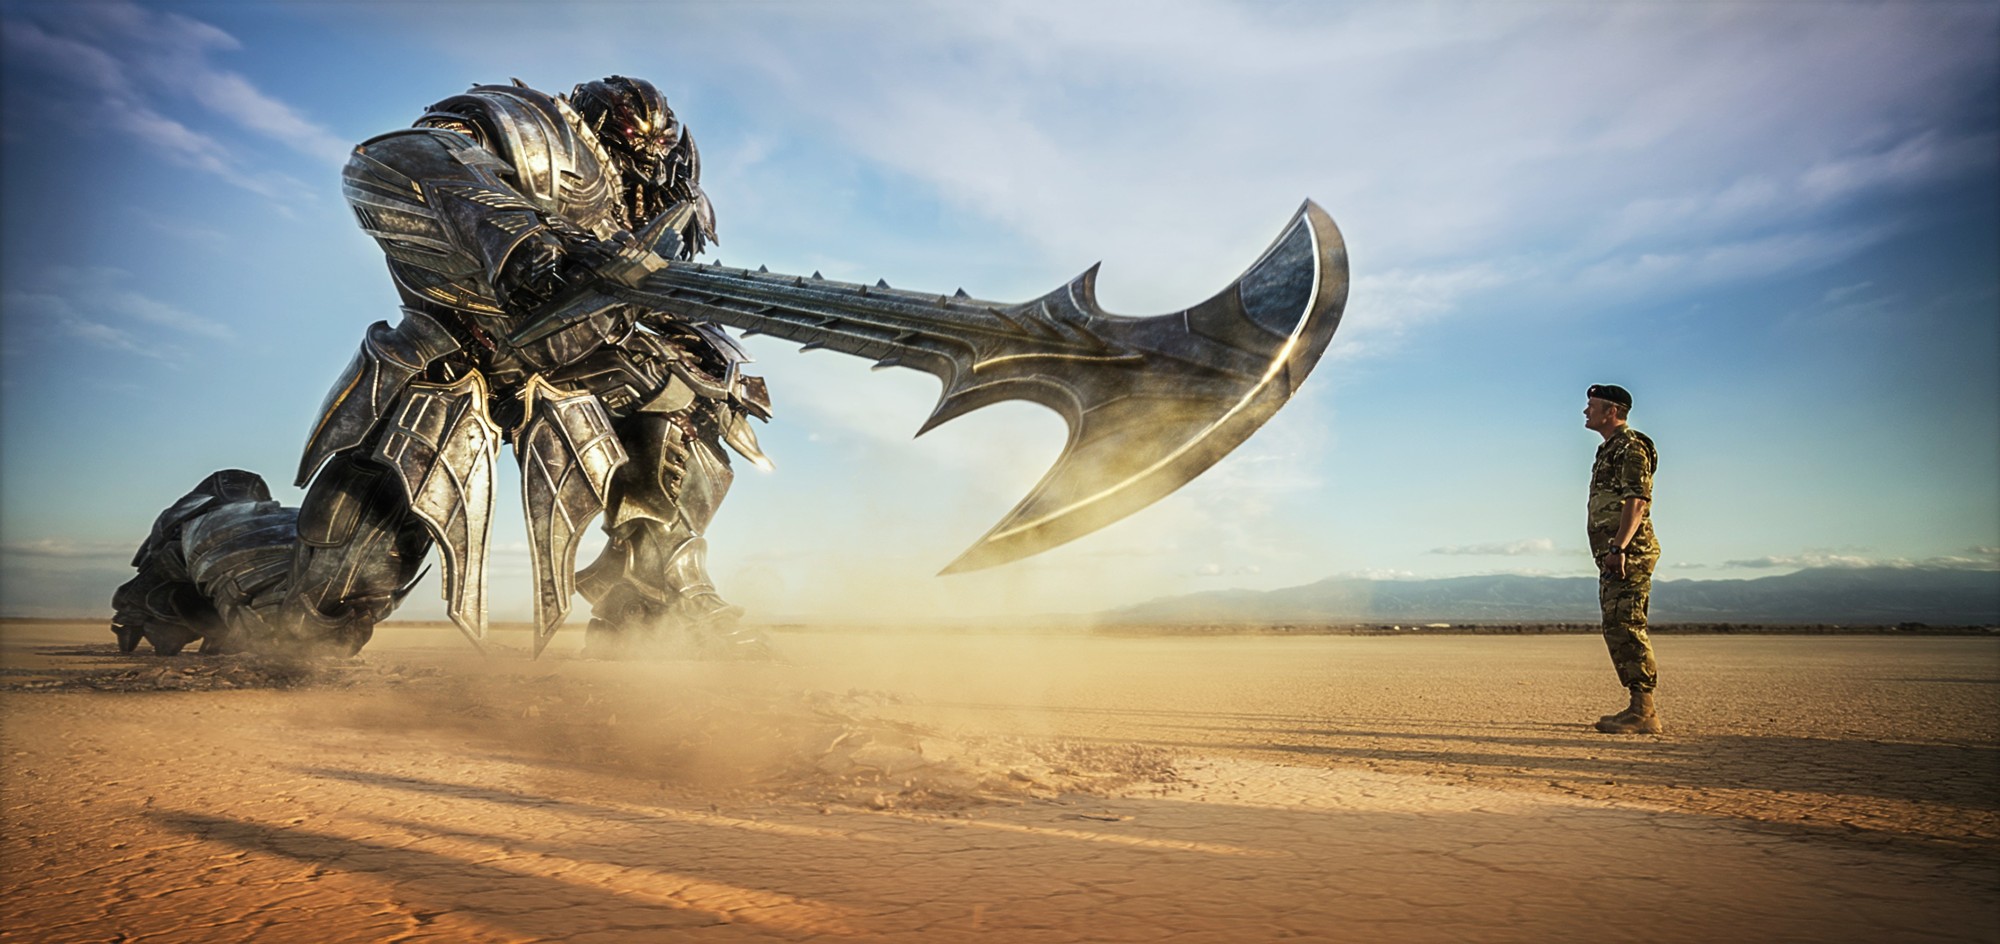 Megatron and Josh Duhamel (Lt. Colonel William Lennox) in Paramount Pictures' Transformers: The Last Knight (2017)